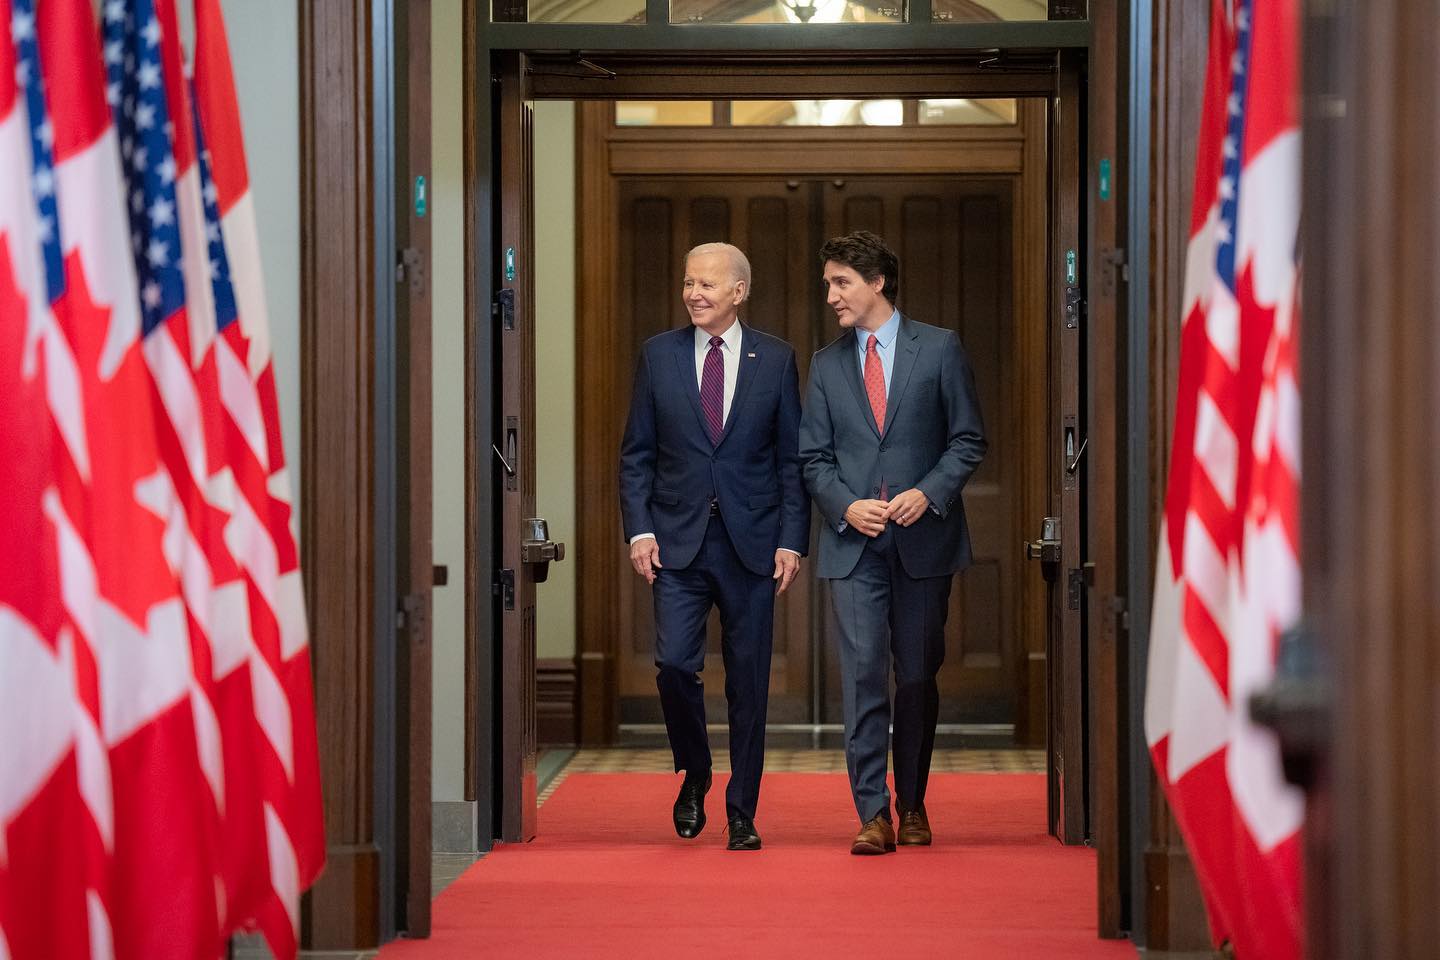 Joe Biden, wearing a dark blue suit, walks down a red carpet lined with U.S. and Canadian flags next to Justin Trudeau in a grey suit.